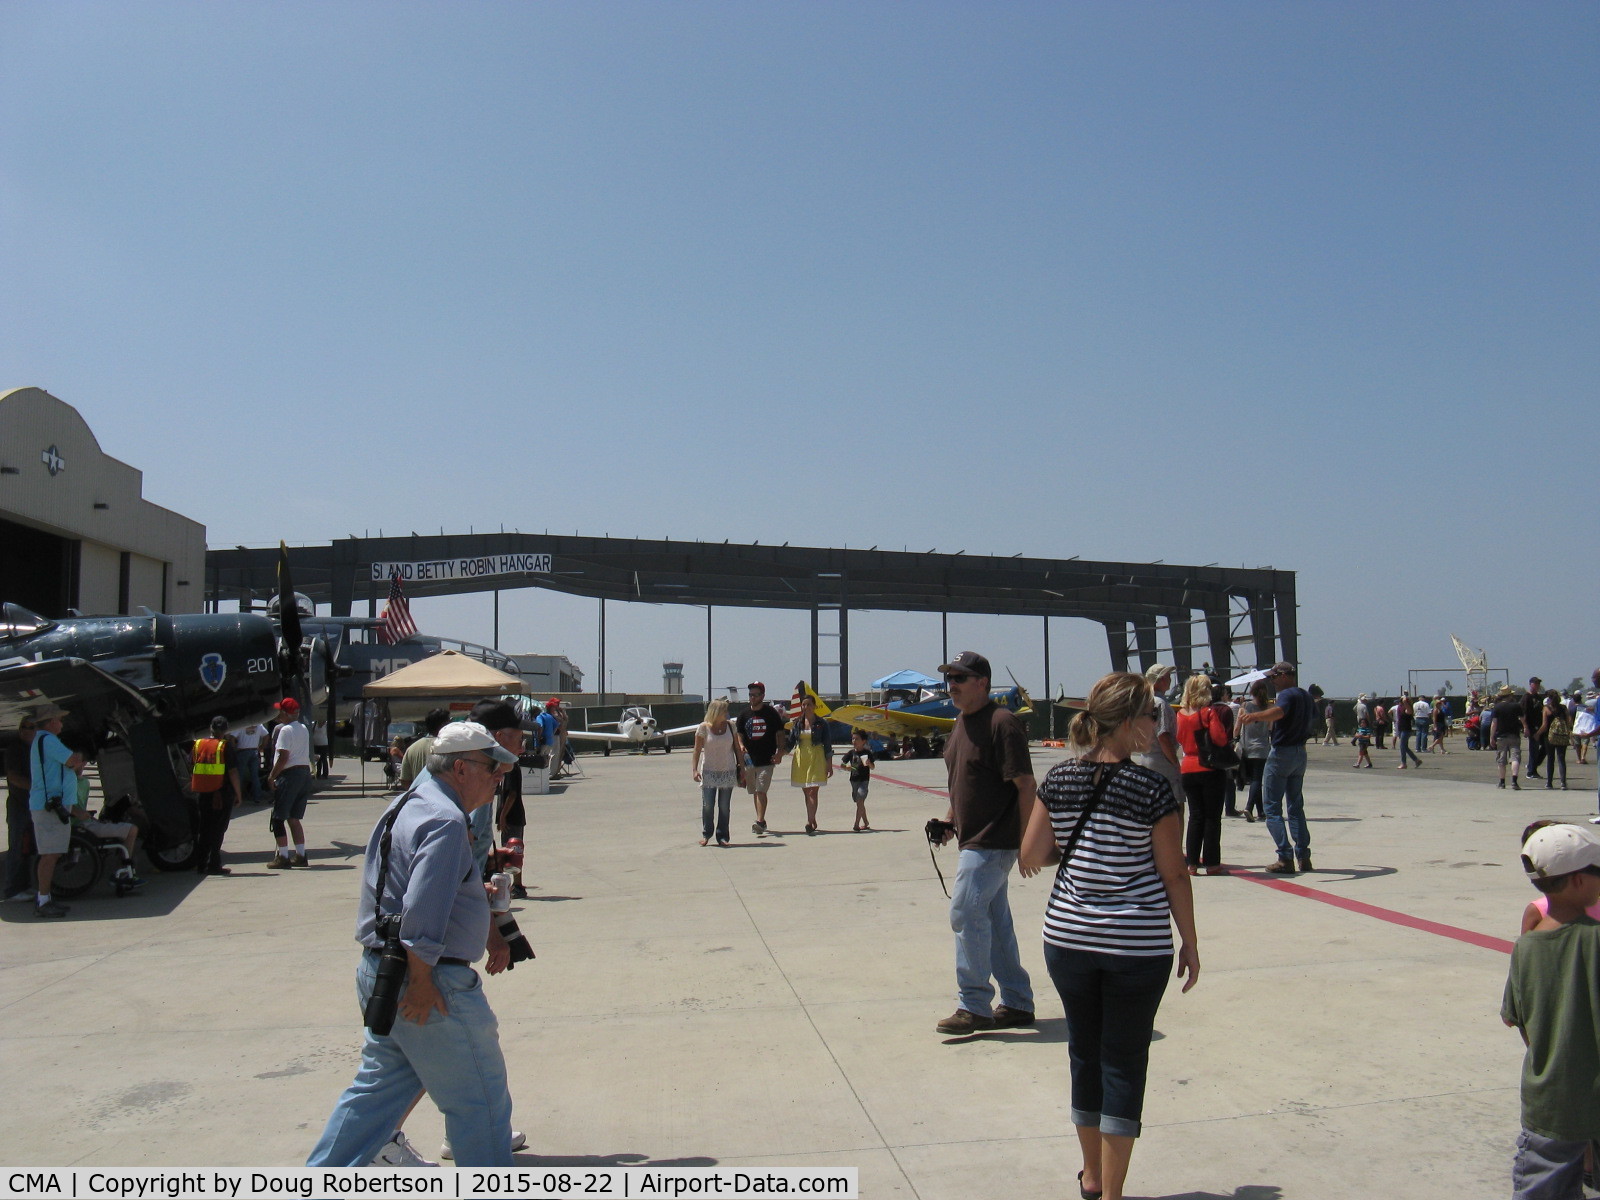 Camarillo Airport (CMA) - New EAA Chapter 723 large hangar under construction adjacent west of the CAF hangars in distance, taken at the Annual CMA Airshow.